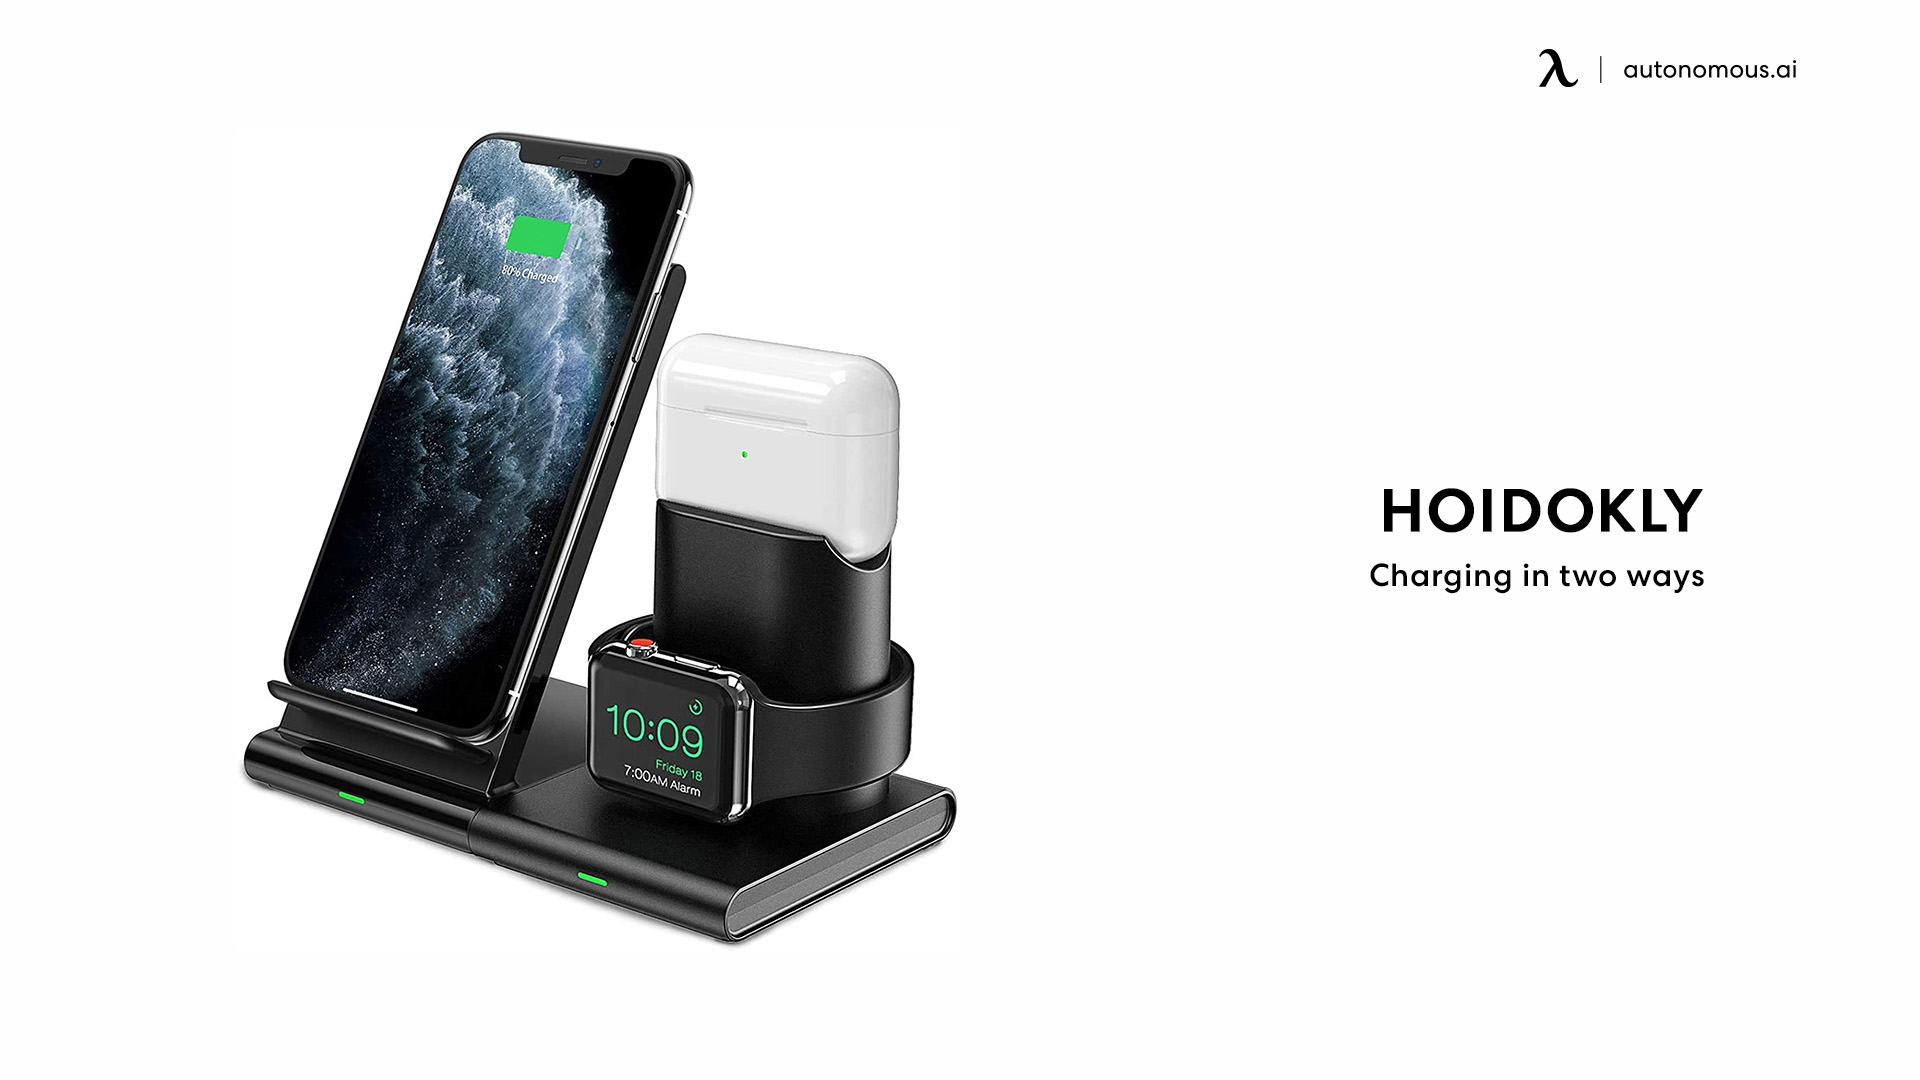 HOIDOKLY 5 in 1 charger